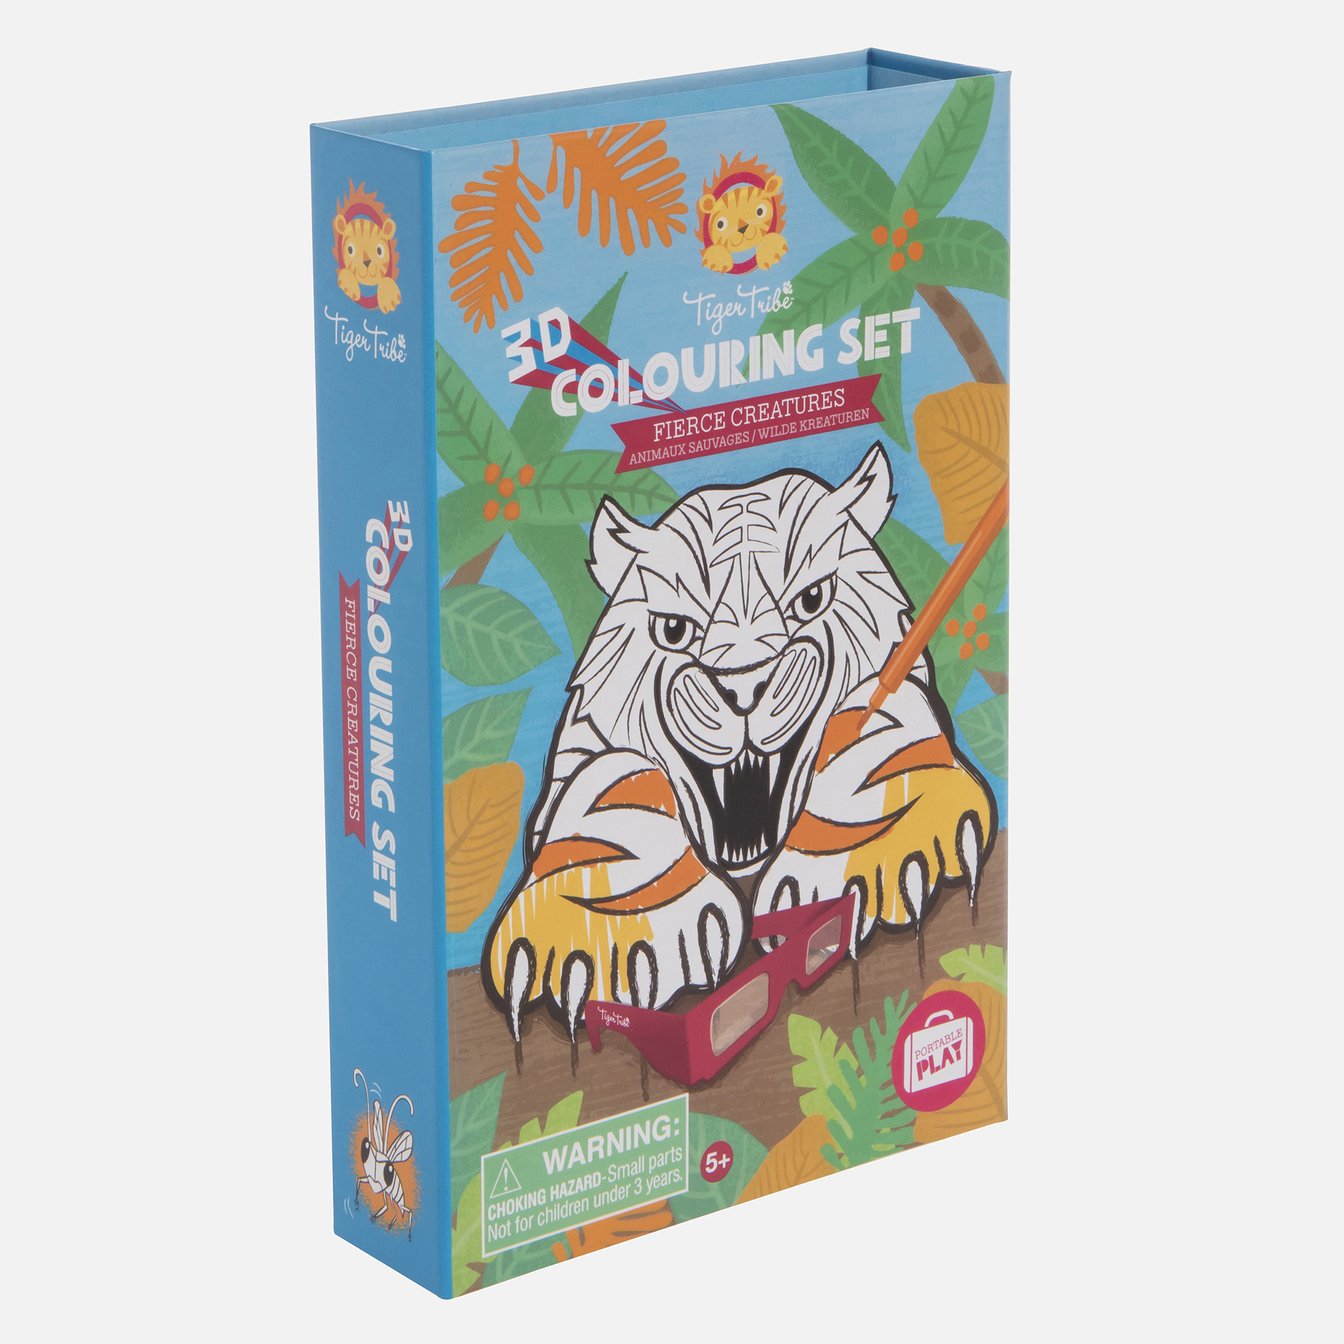 Tiger Tribe | 3D Colouring Set - Fierce Creatures